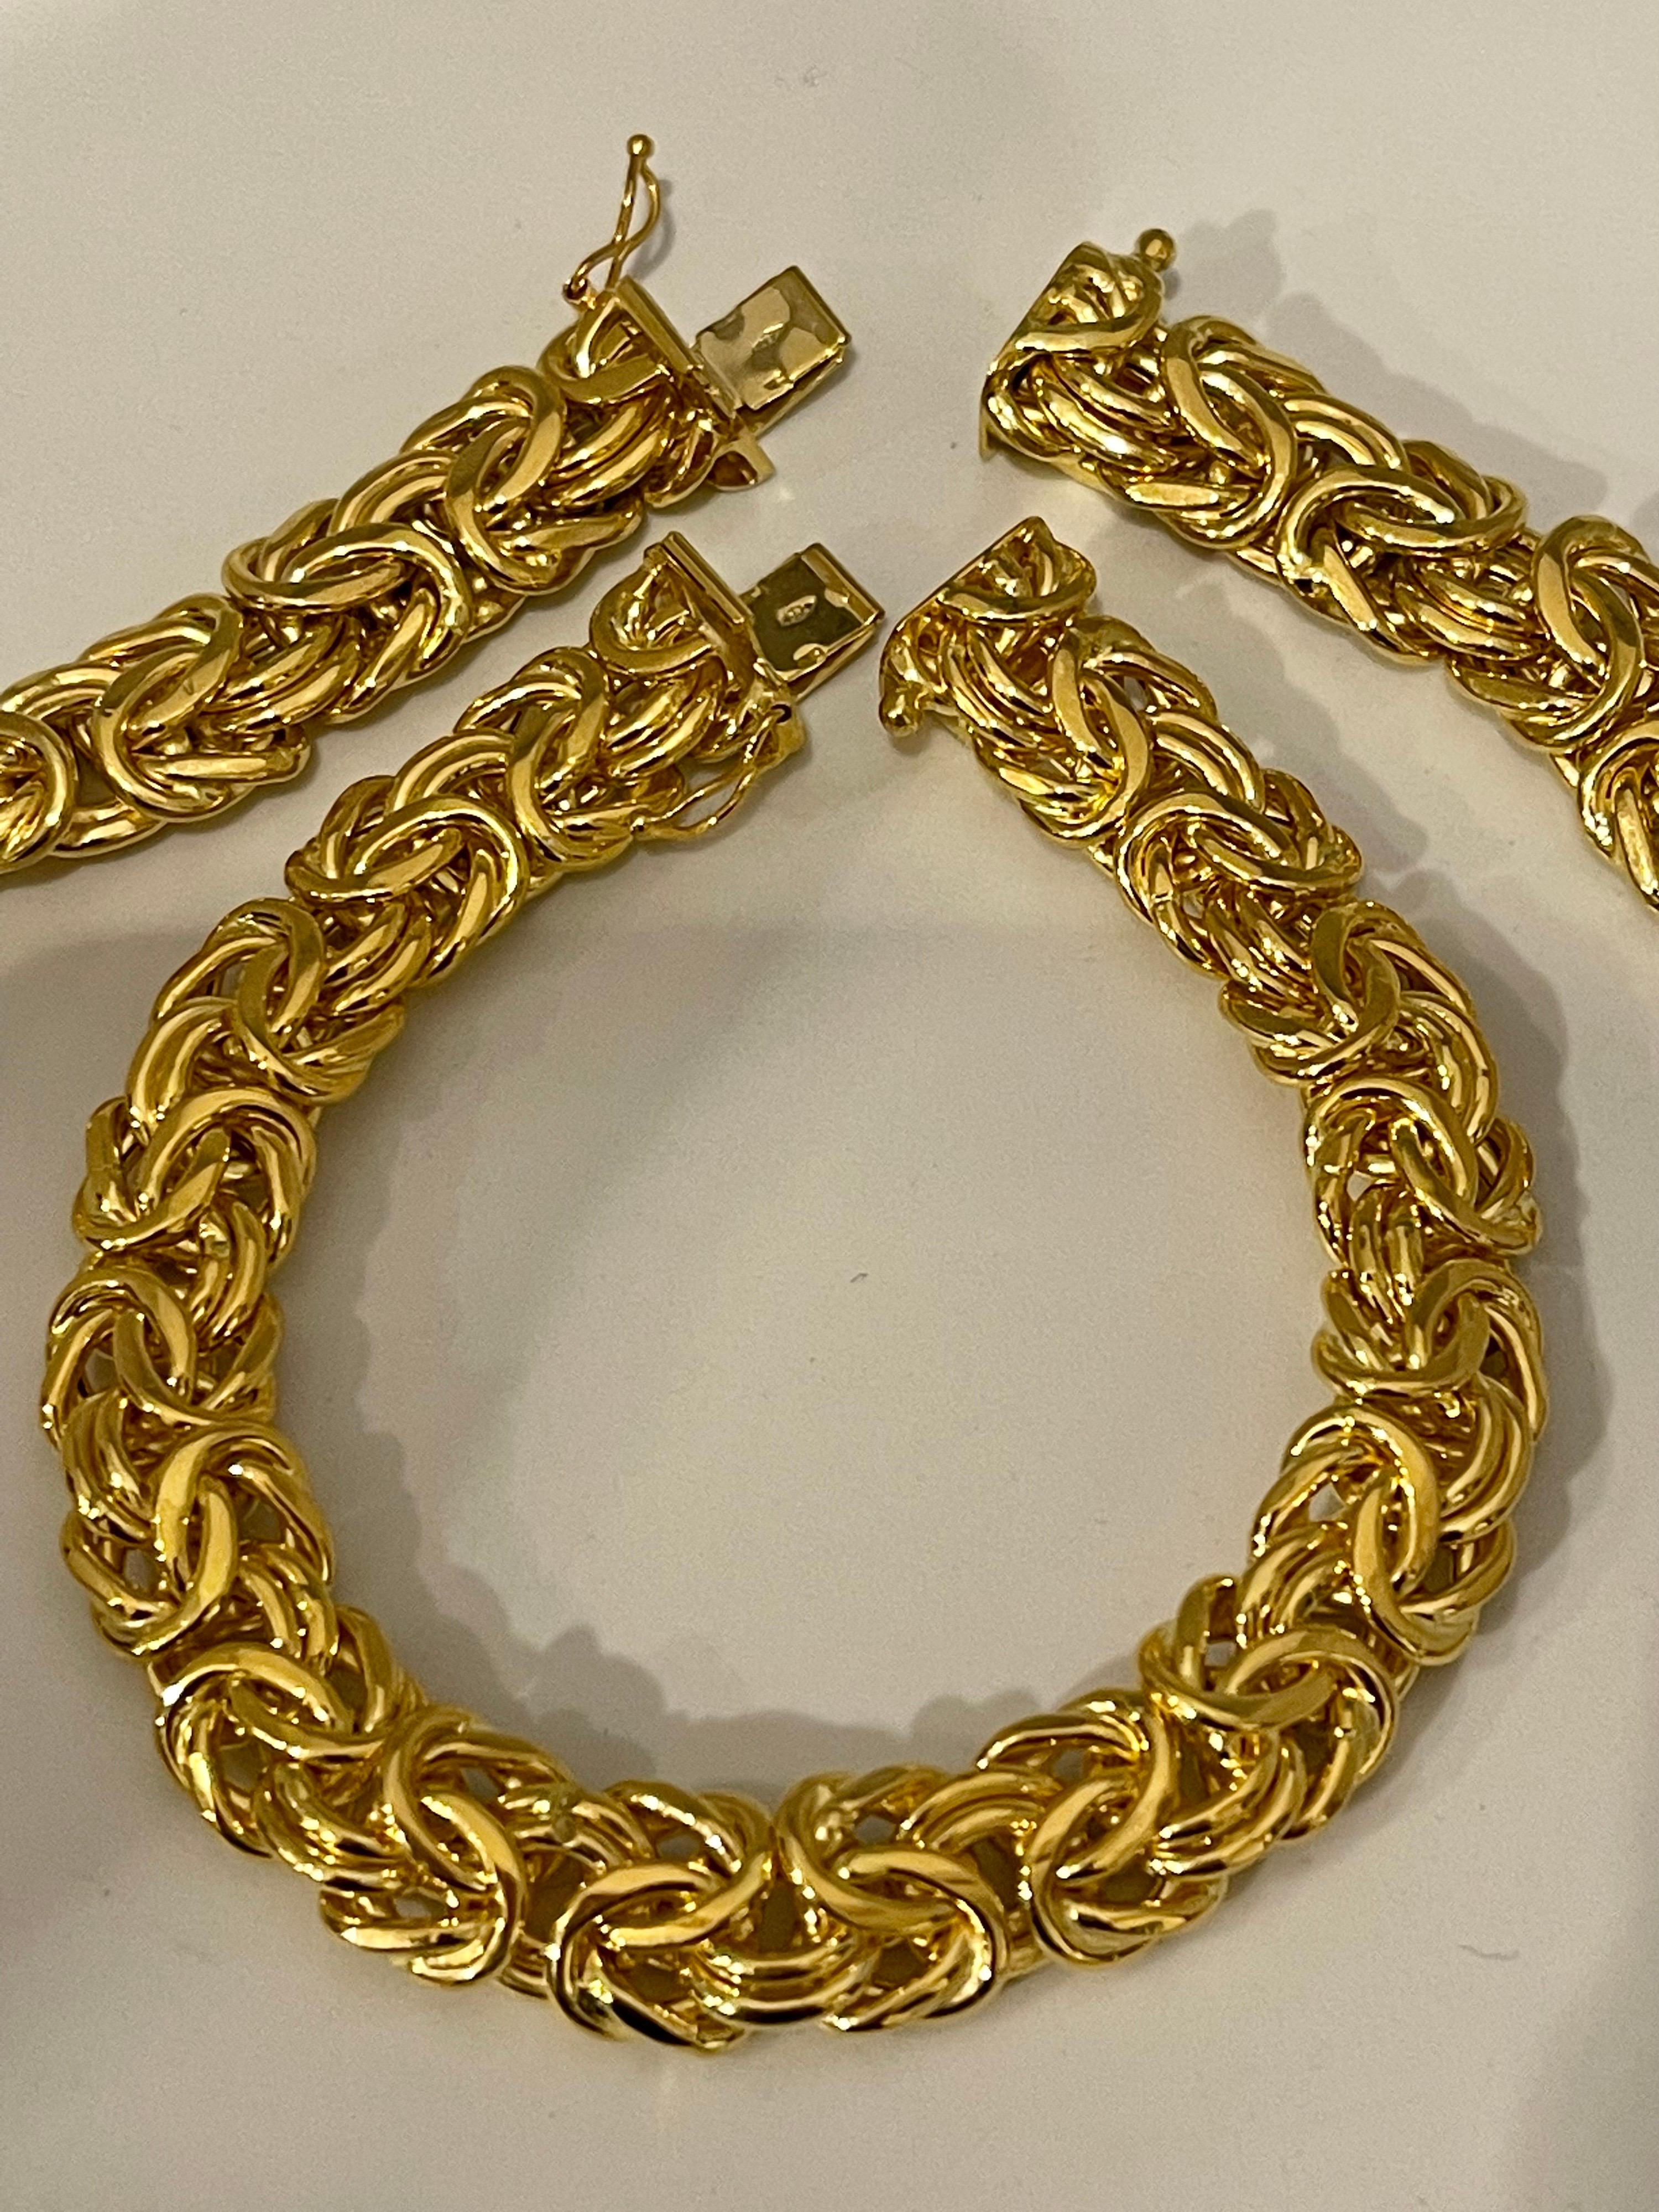 Link Necklace & Bracelet Suite 18 Karat Yellow Gold 97 Gm Made in Italy For Sale 3